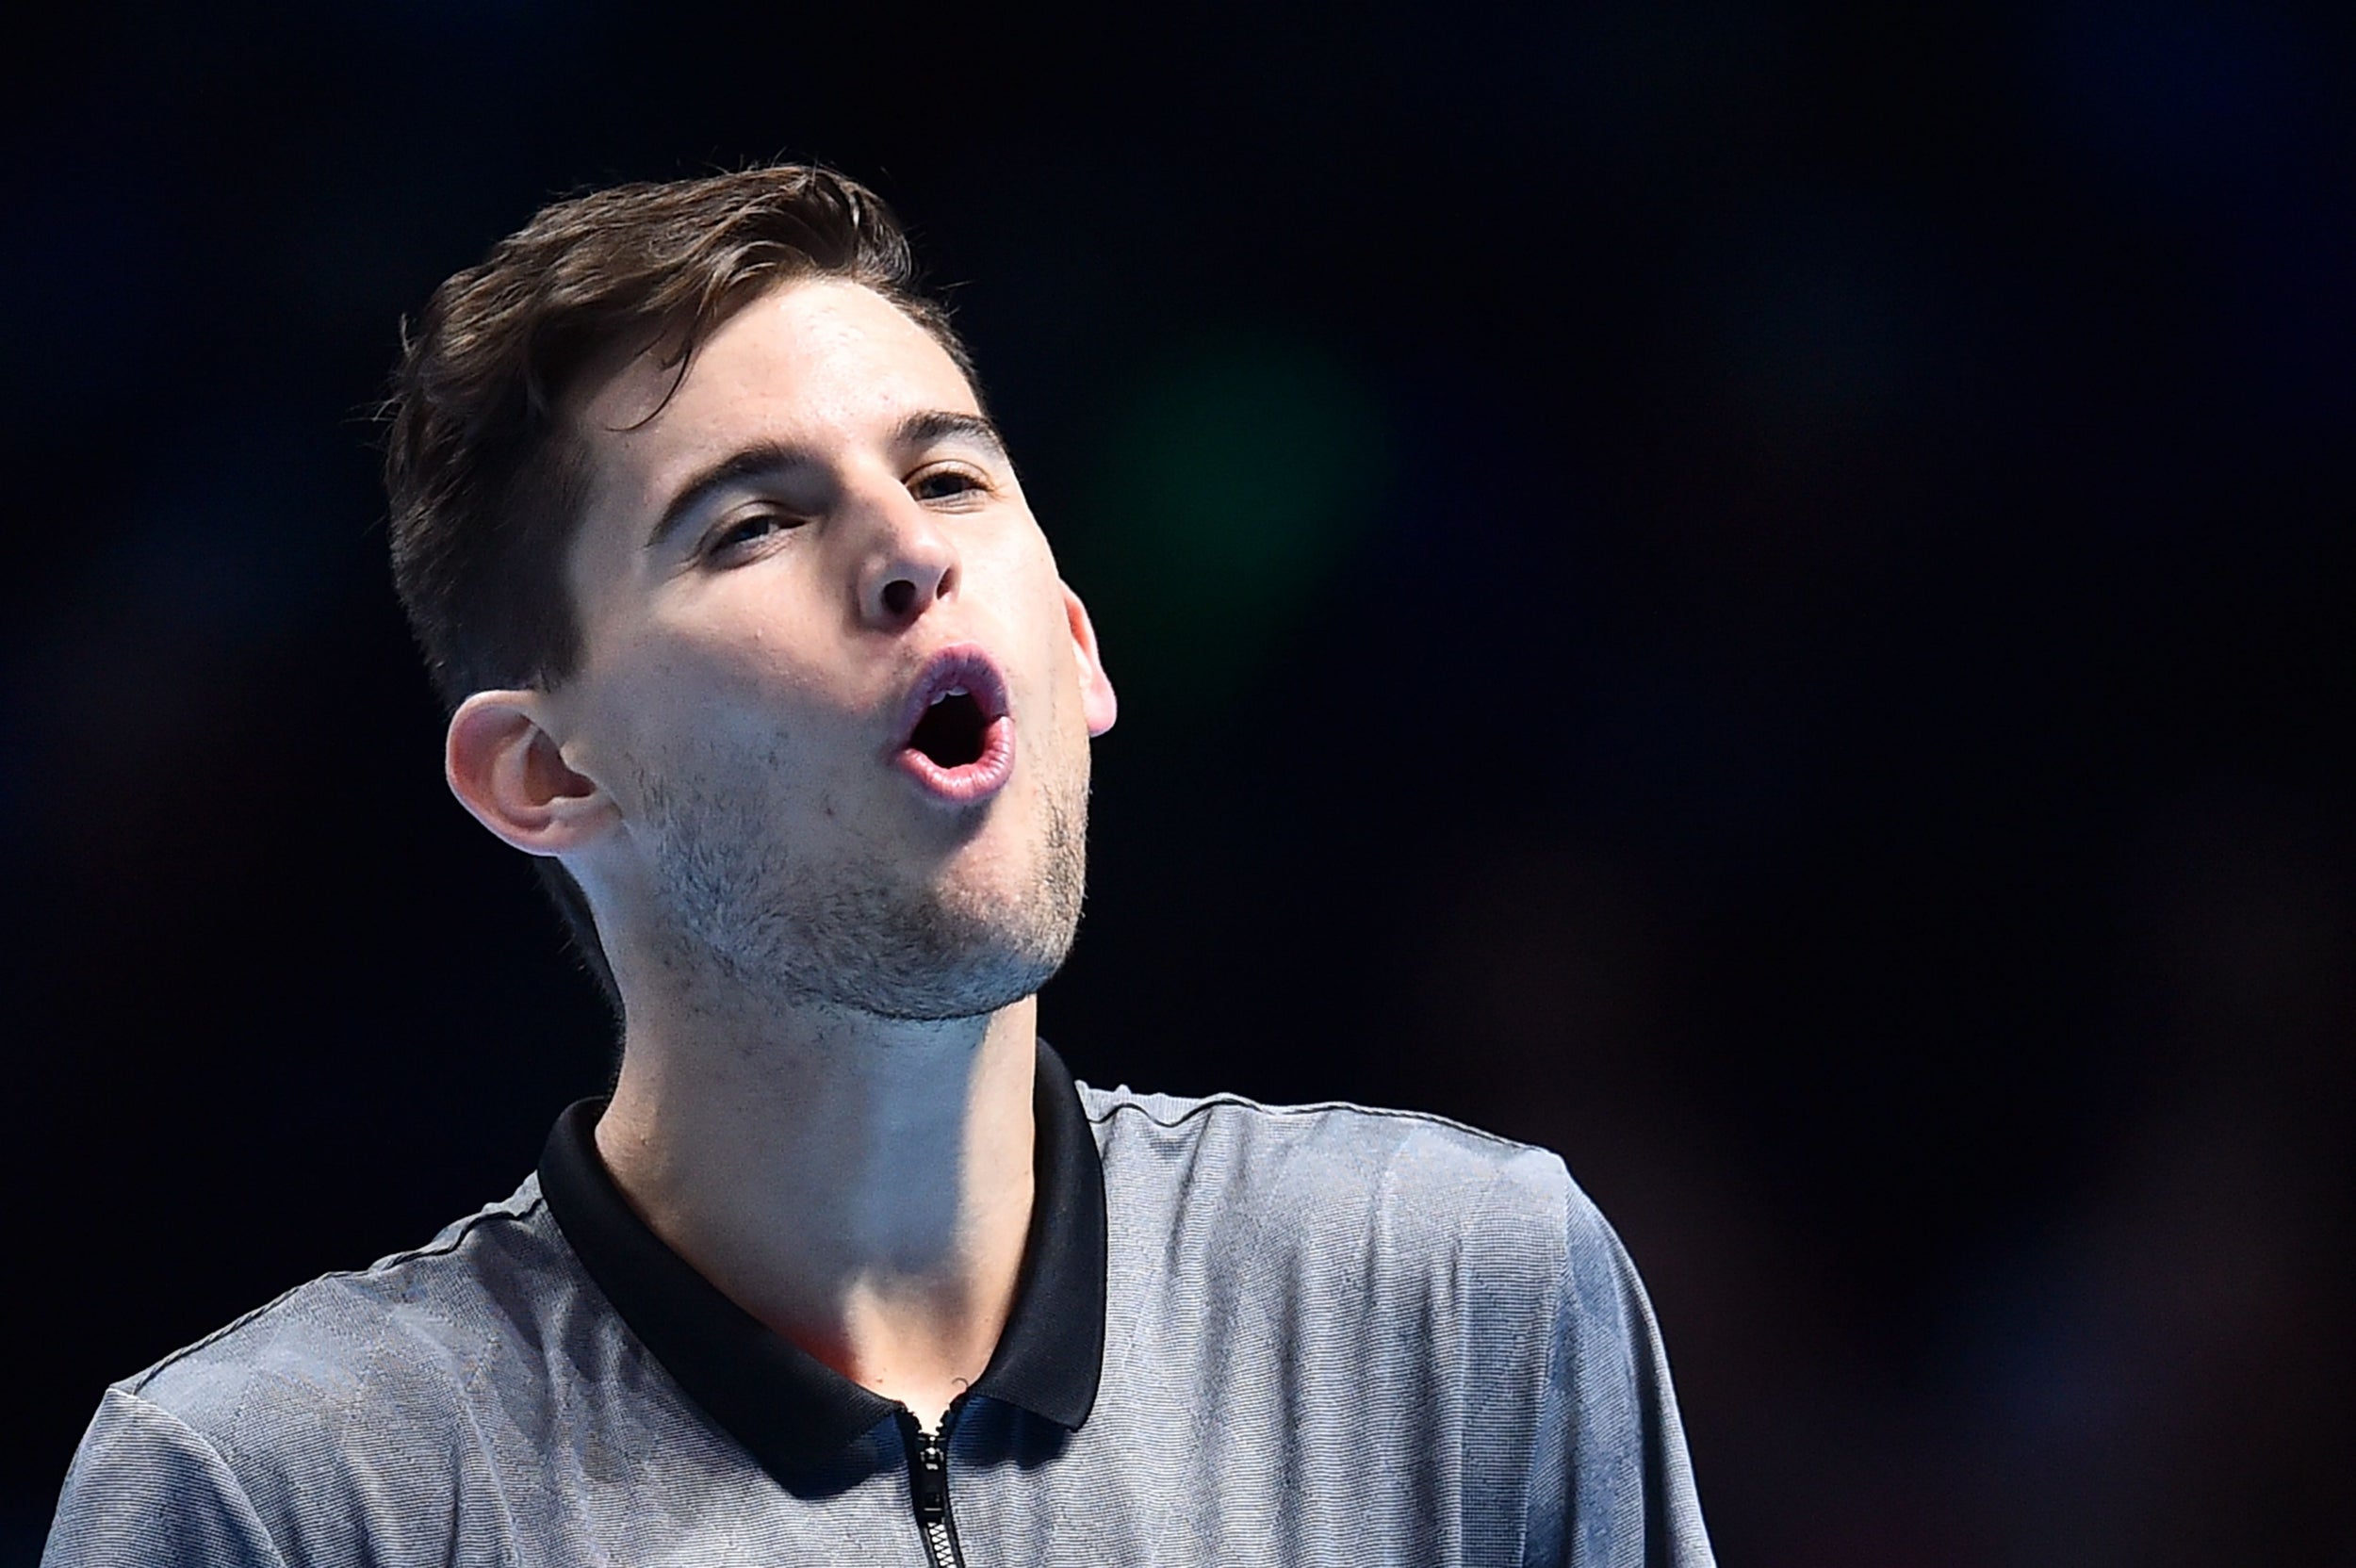 Dominic Thiem reacts to a lost point against Federer (AFP/Getty)